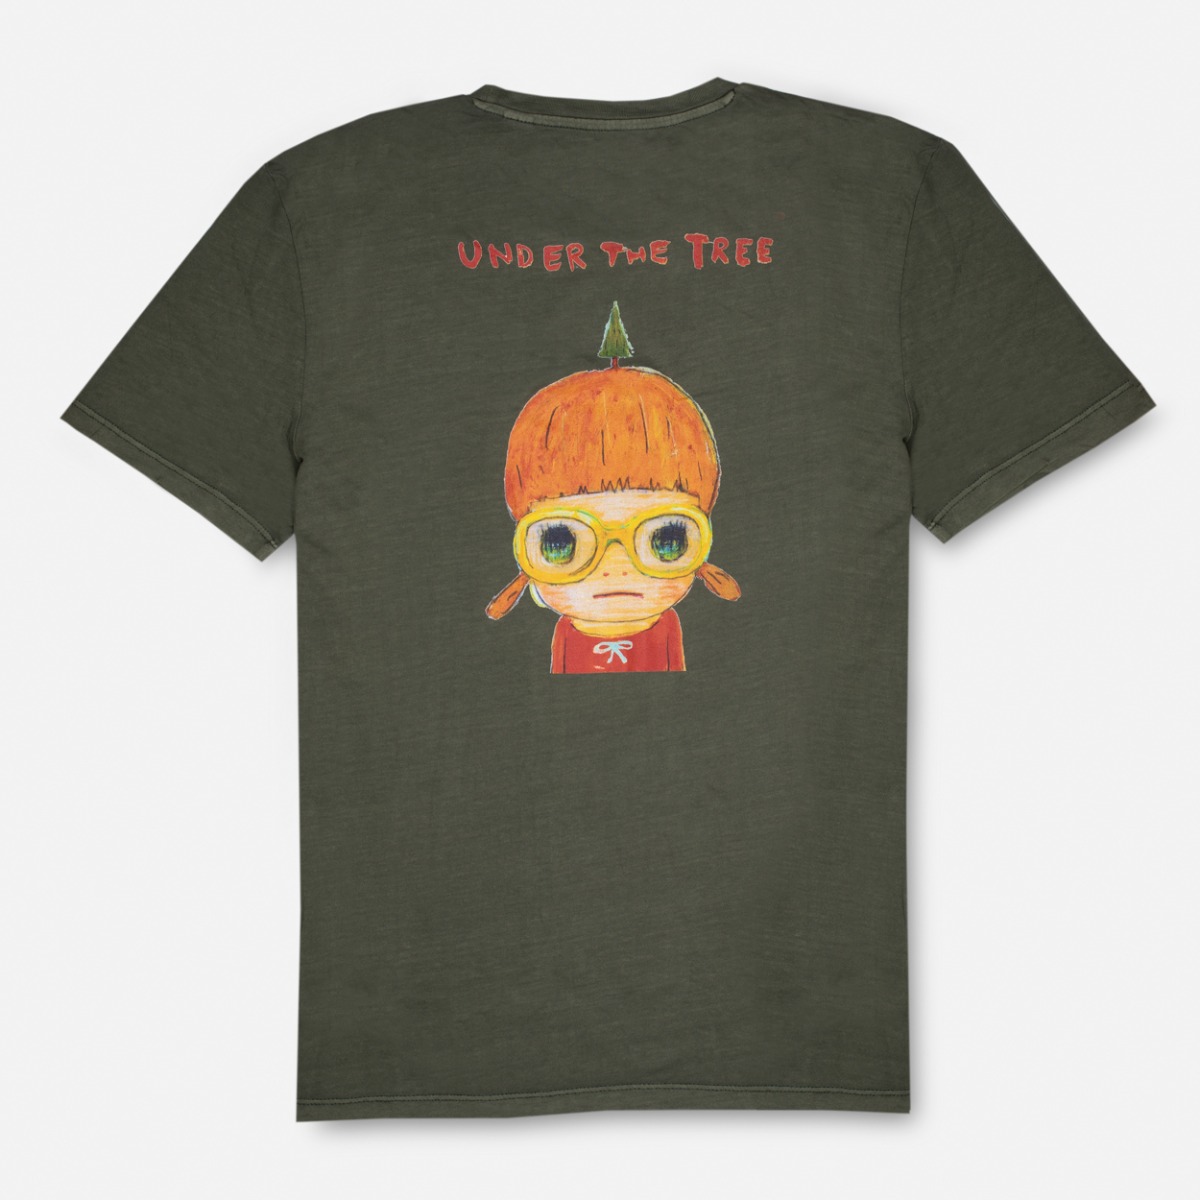 Under the Tree T-shirt, 2006